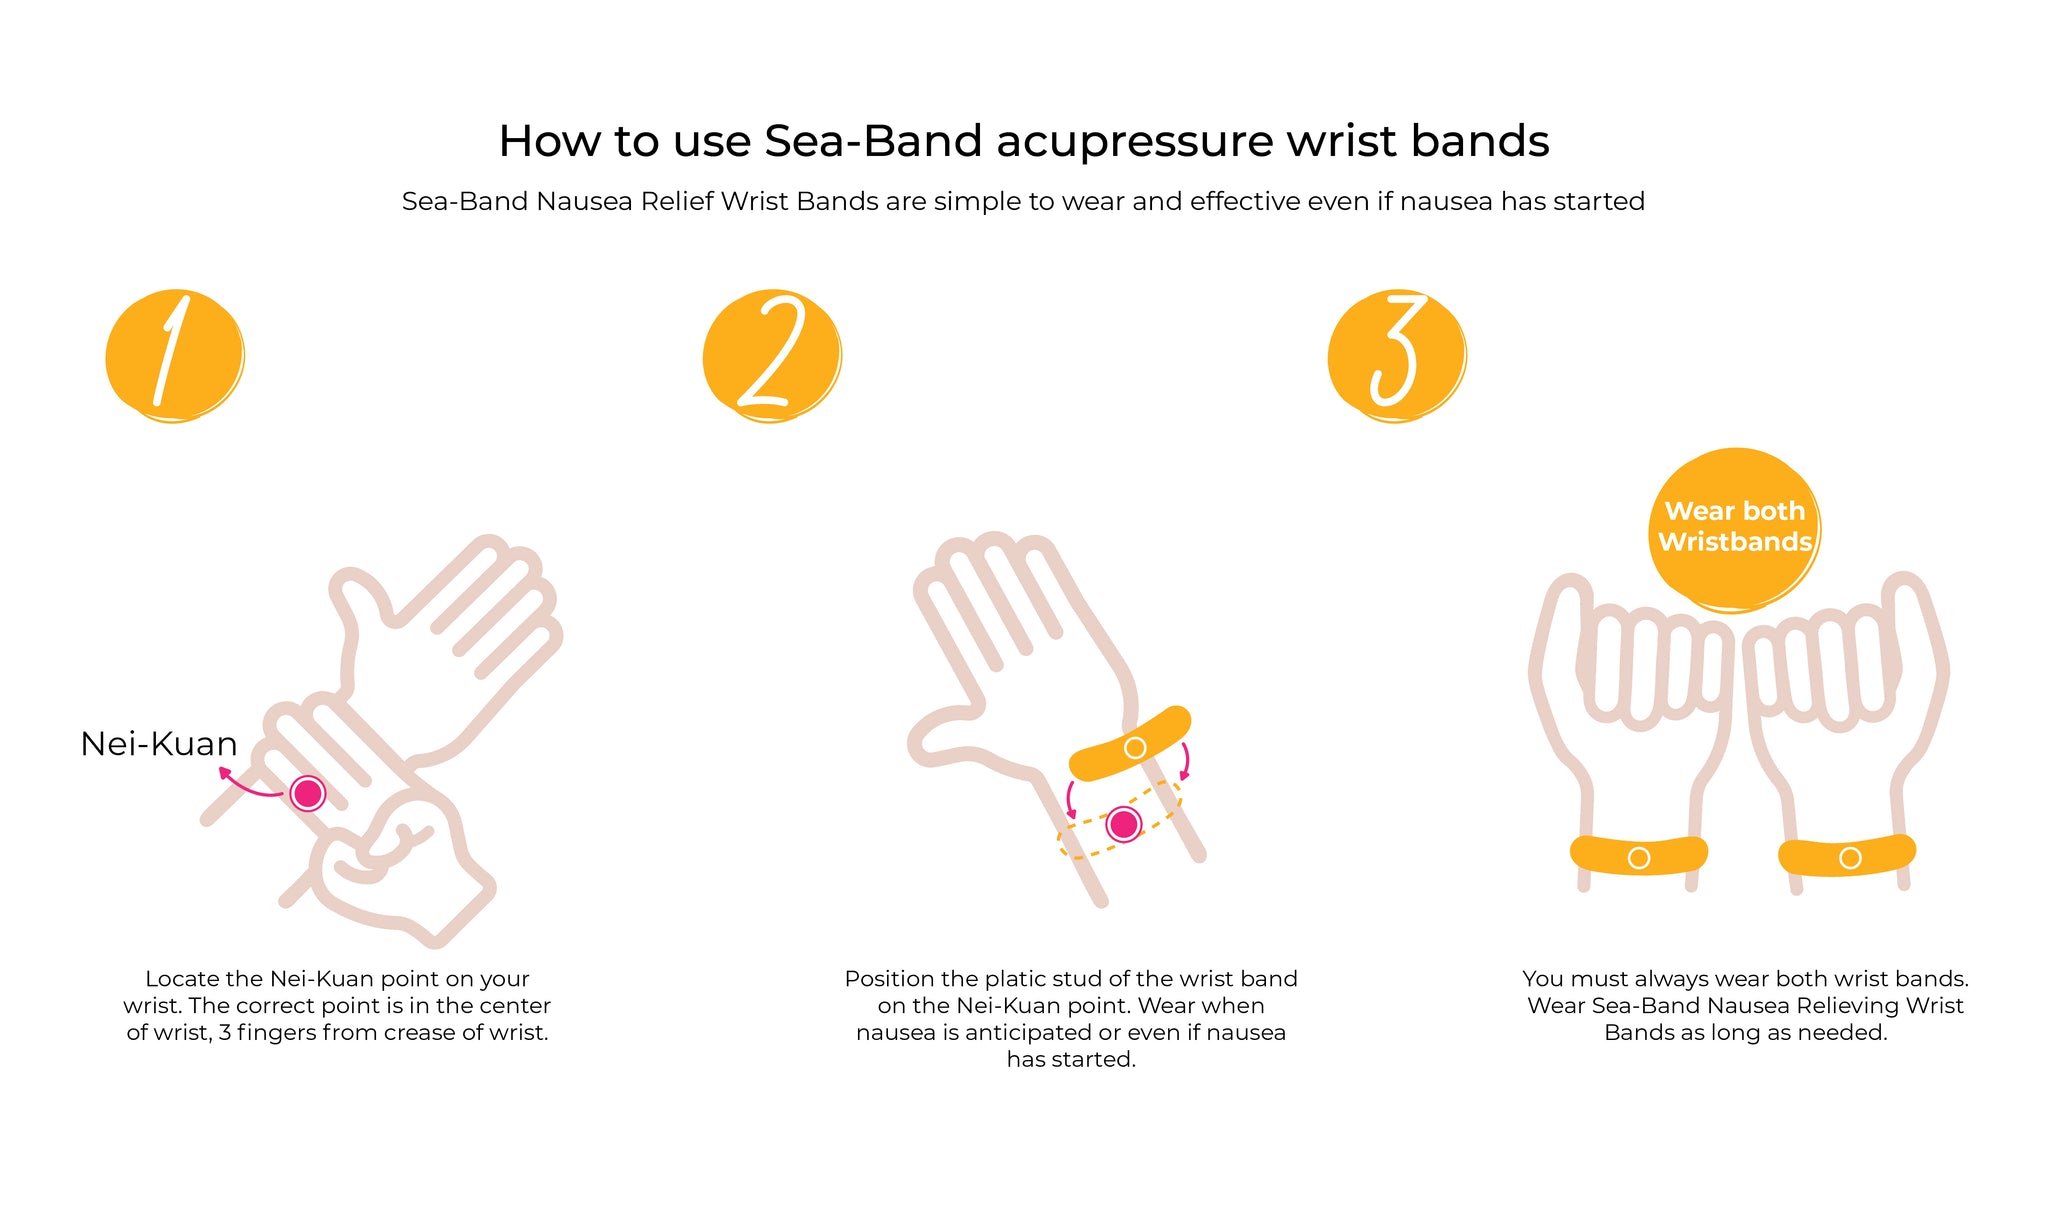 How to Apply Sea-Bands